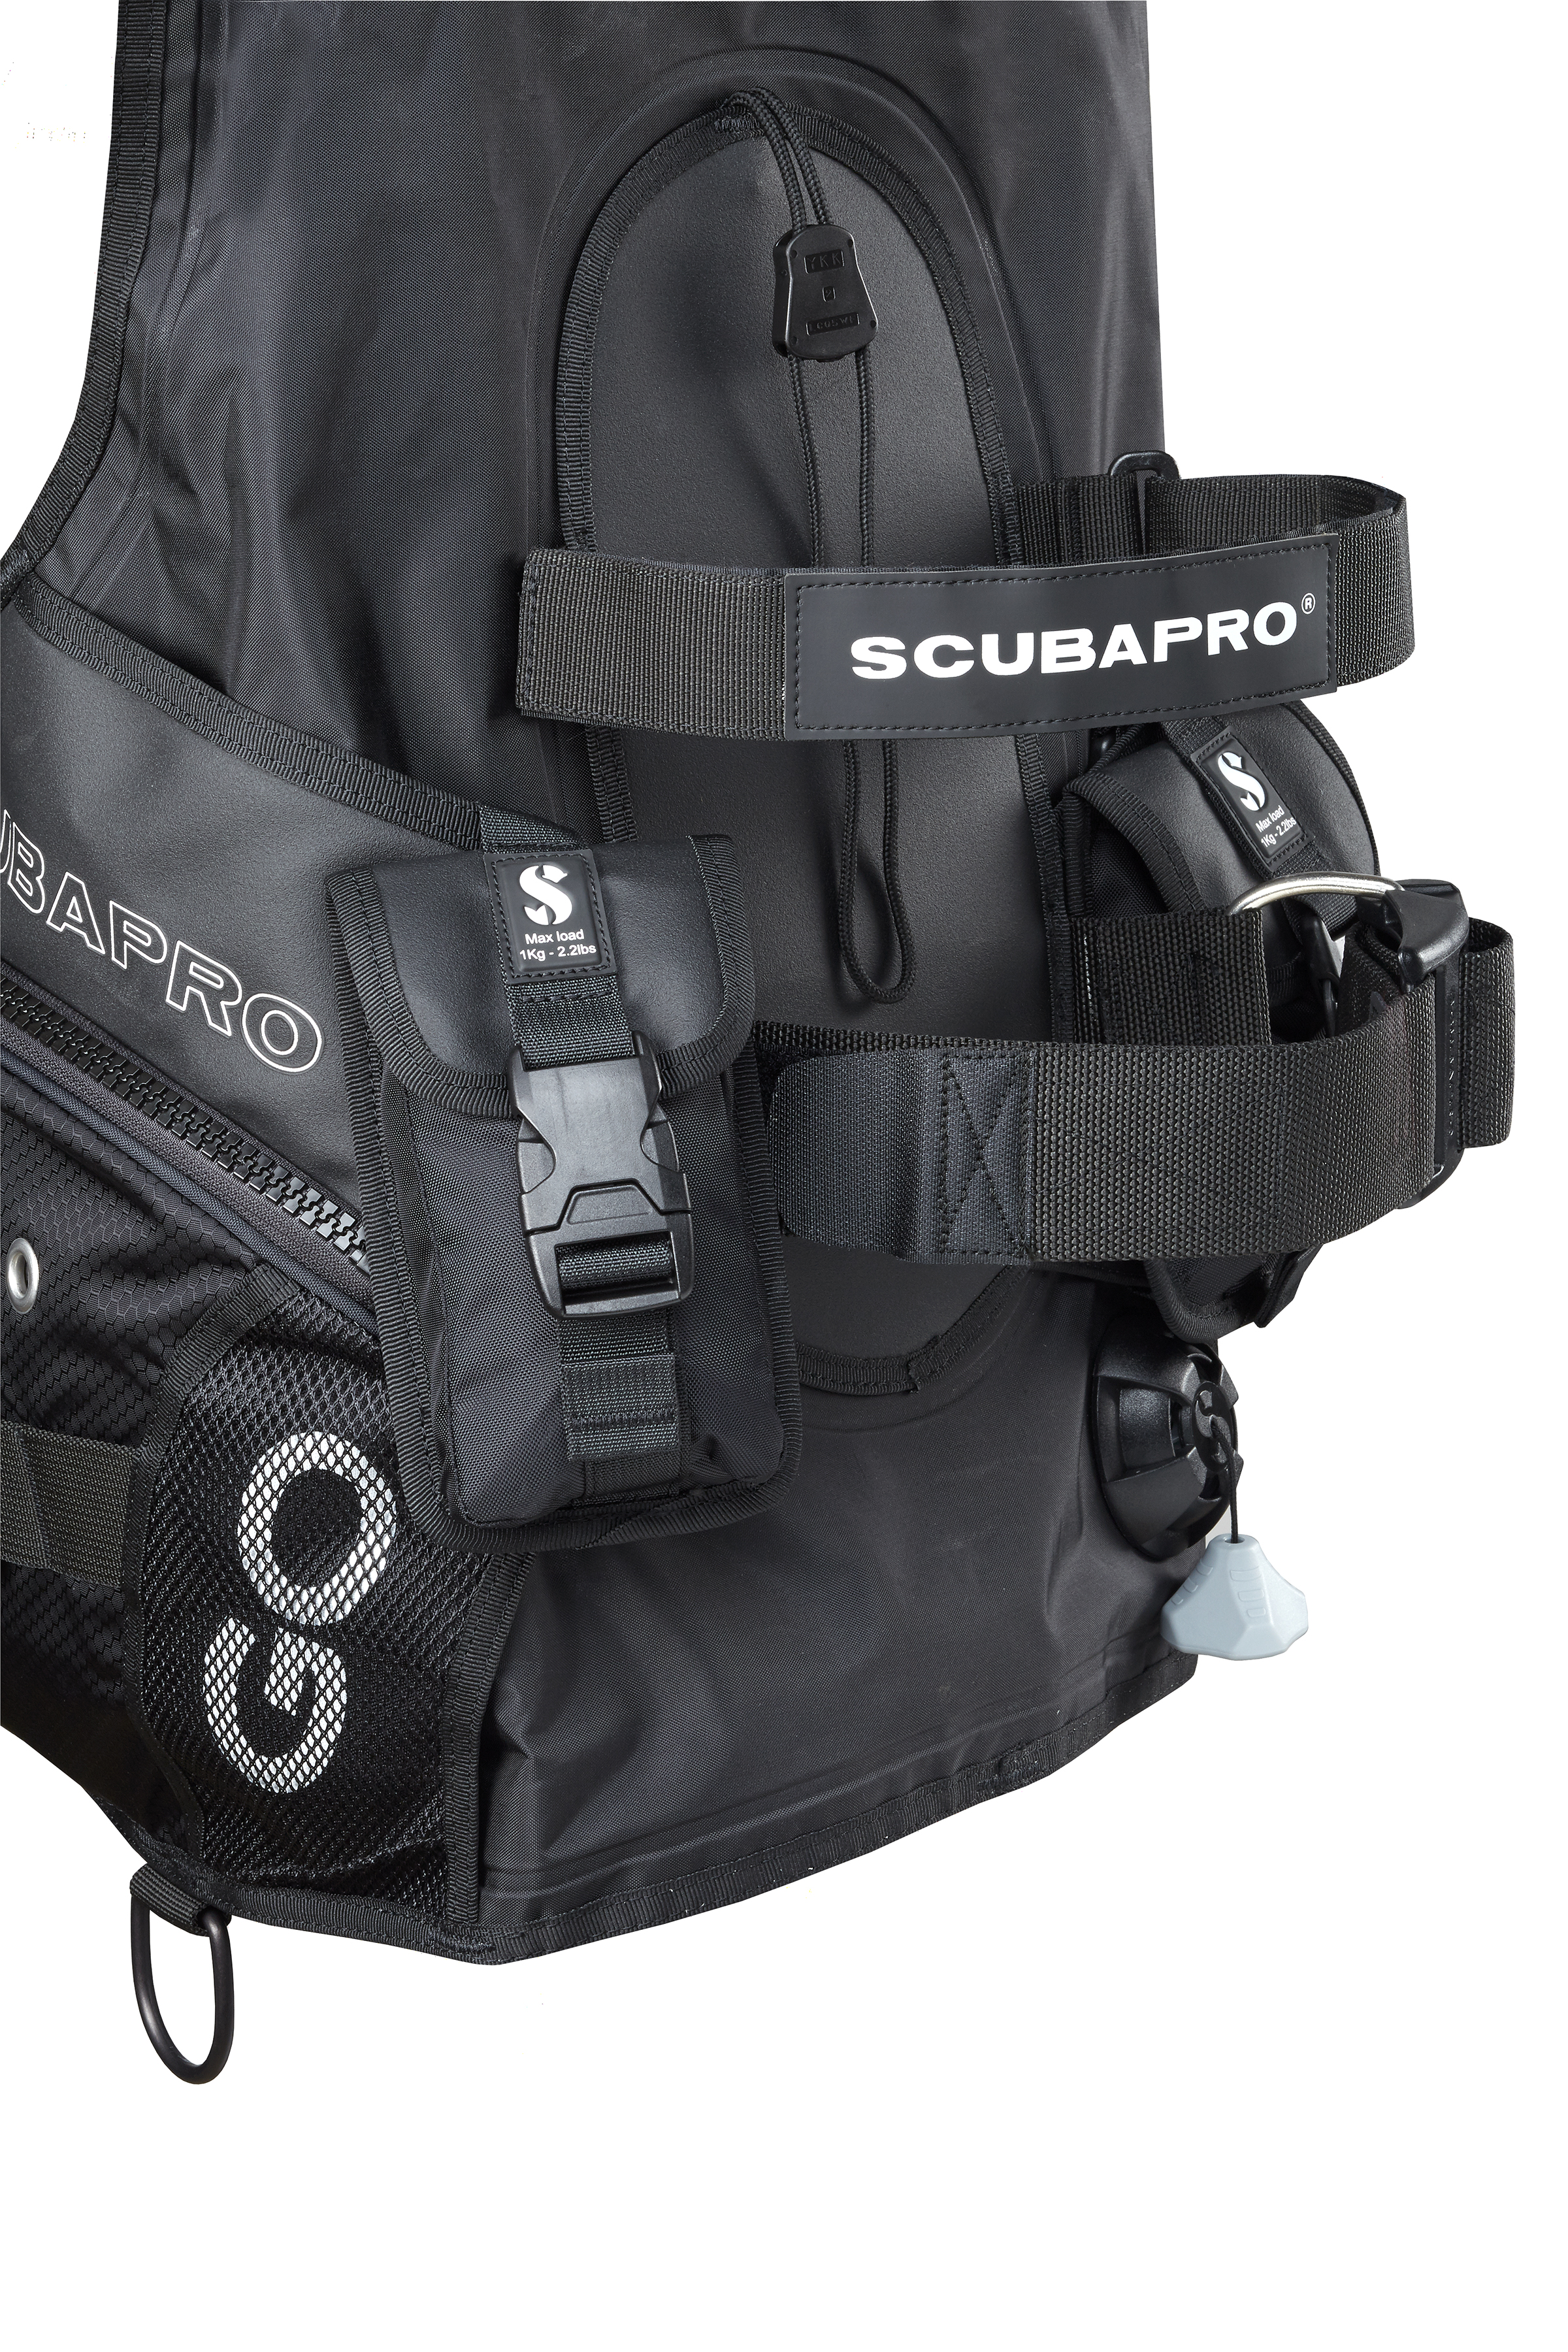 scubapro eco weights